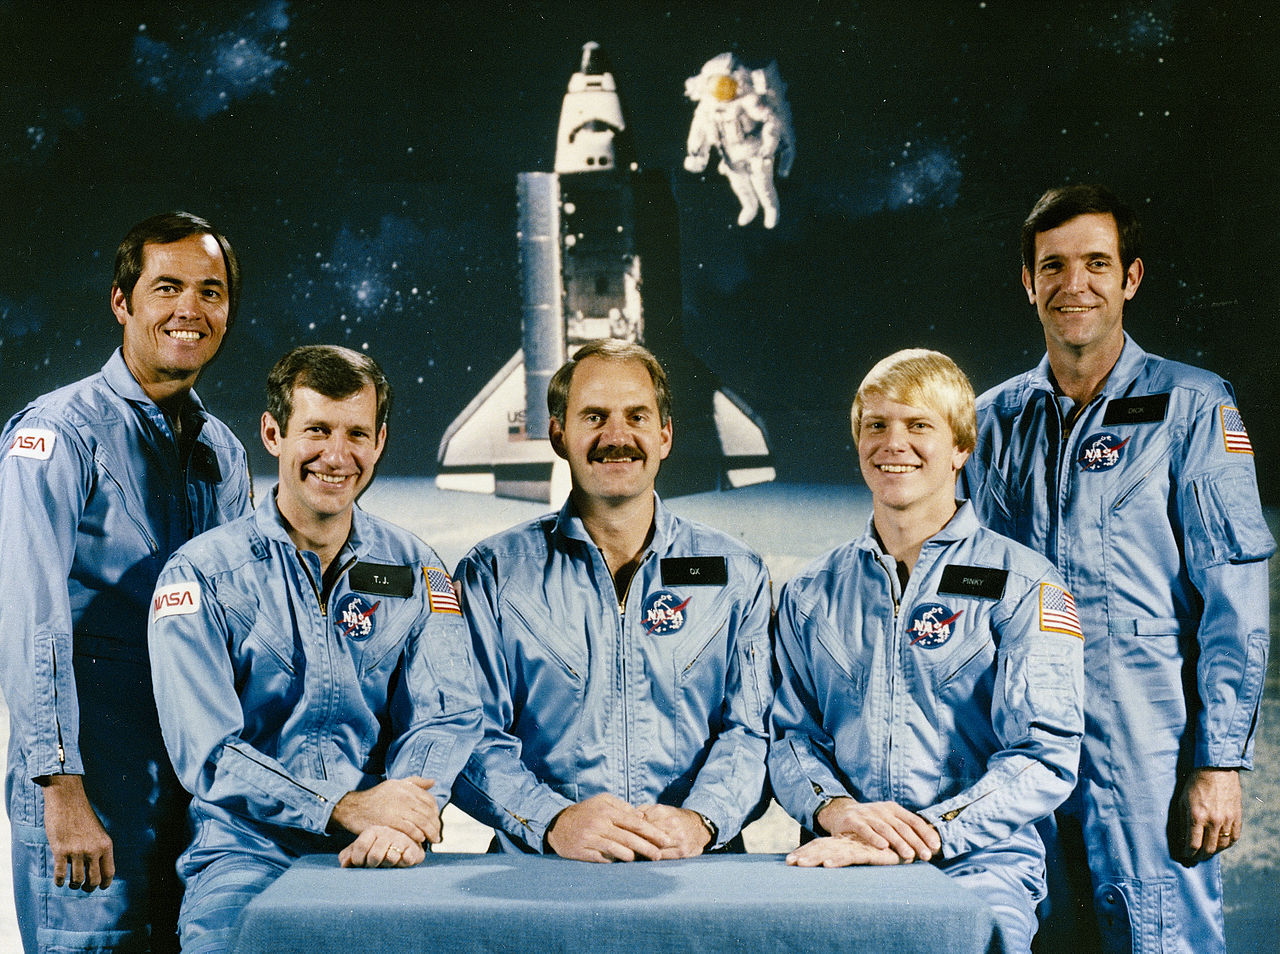 Five crew members in blue jumpsuits pose for portrait wit shuttle and man in spacesuit in the back drop